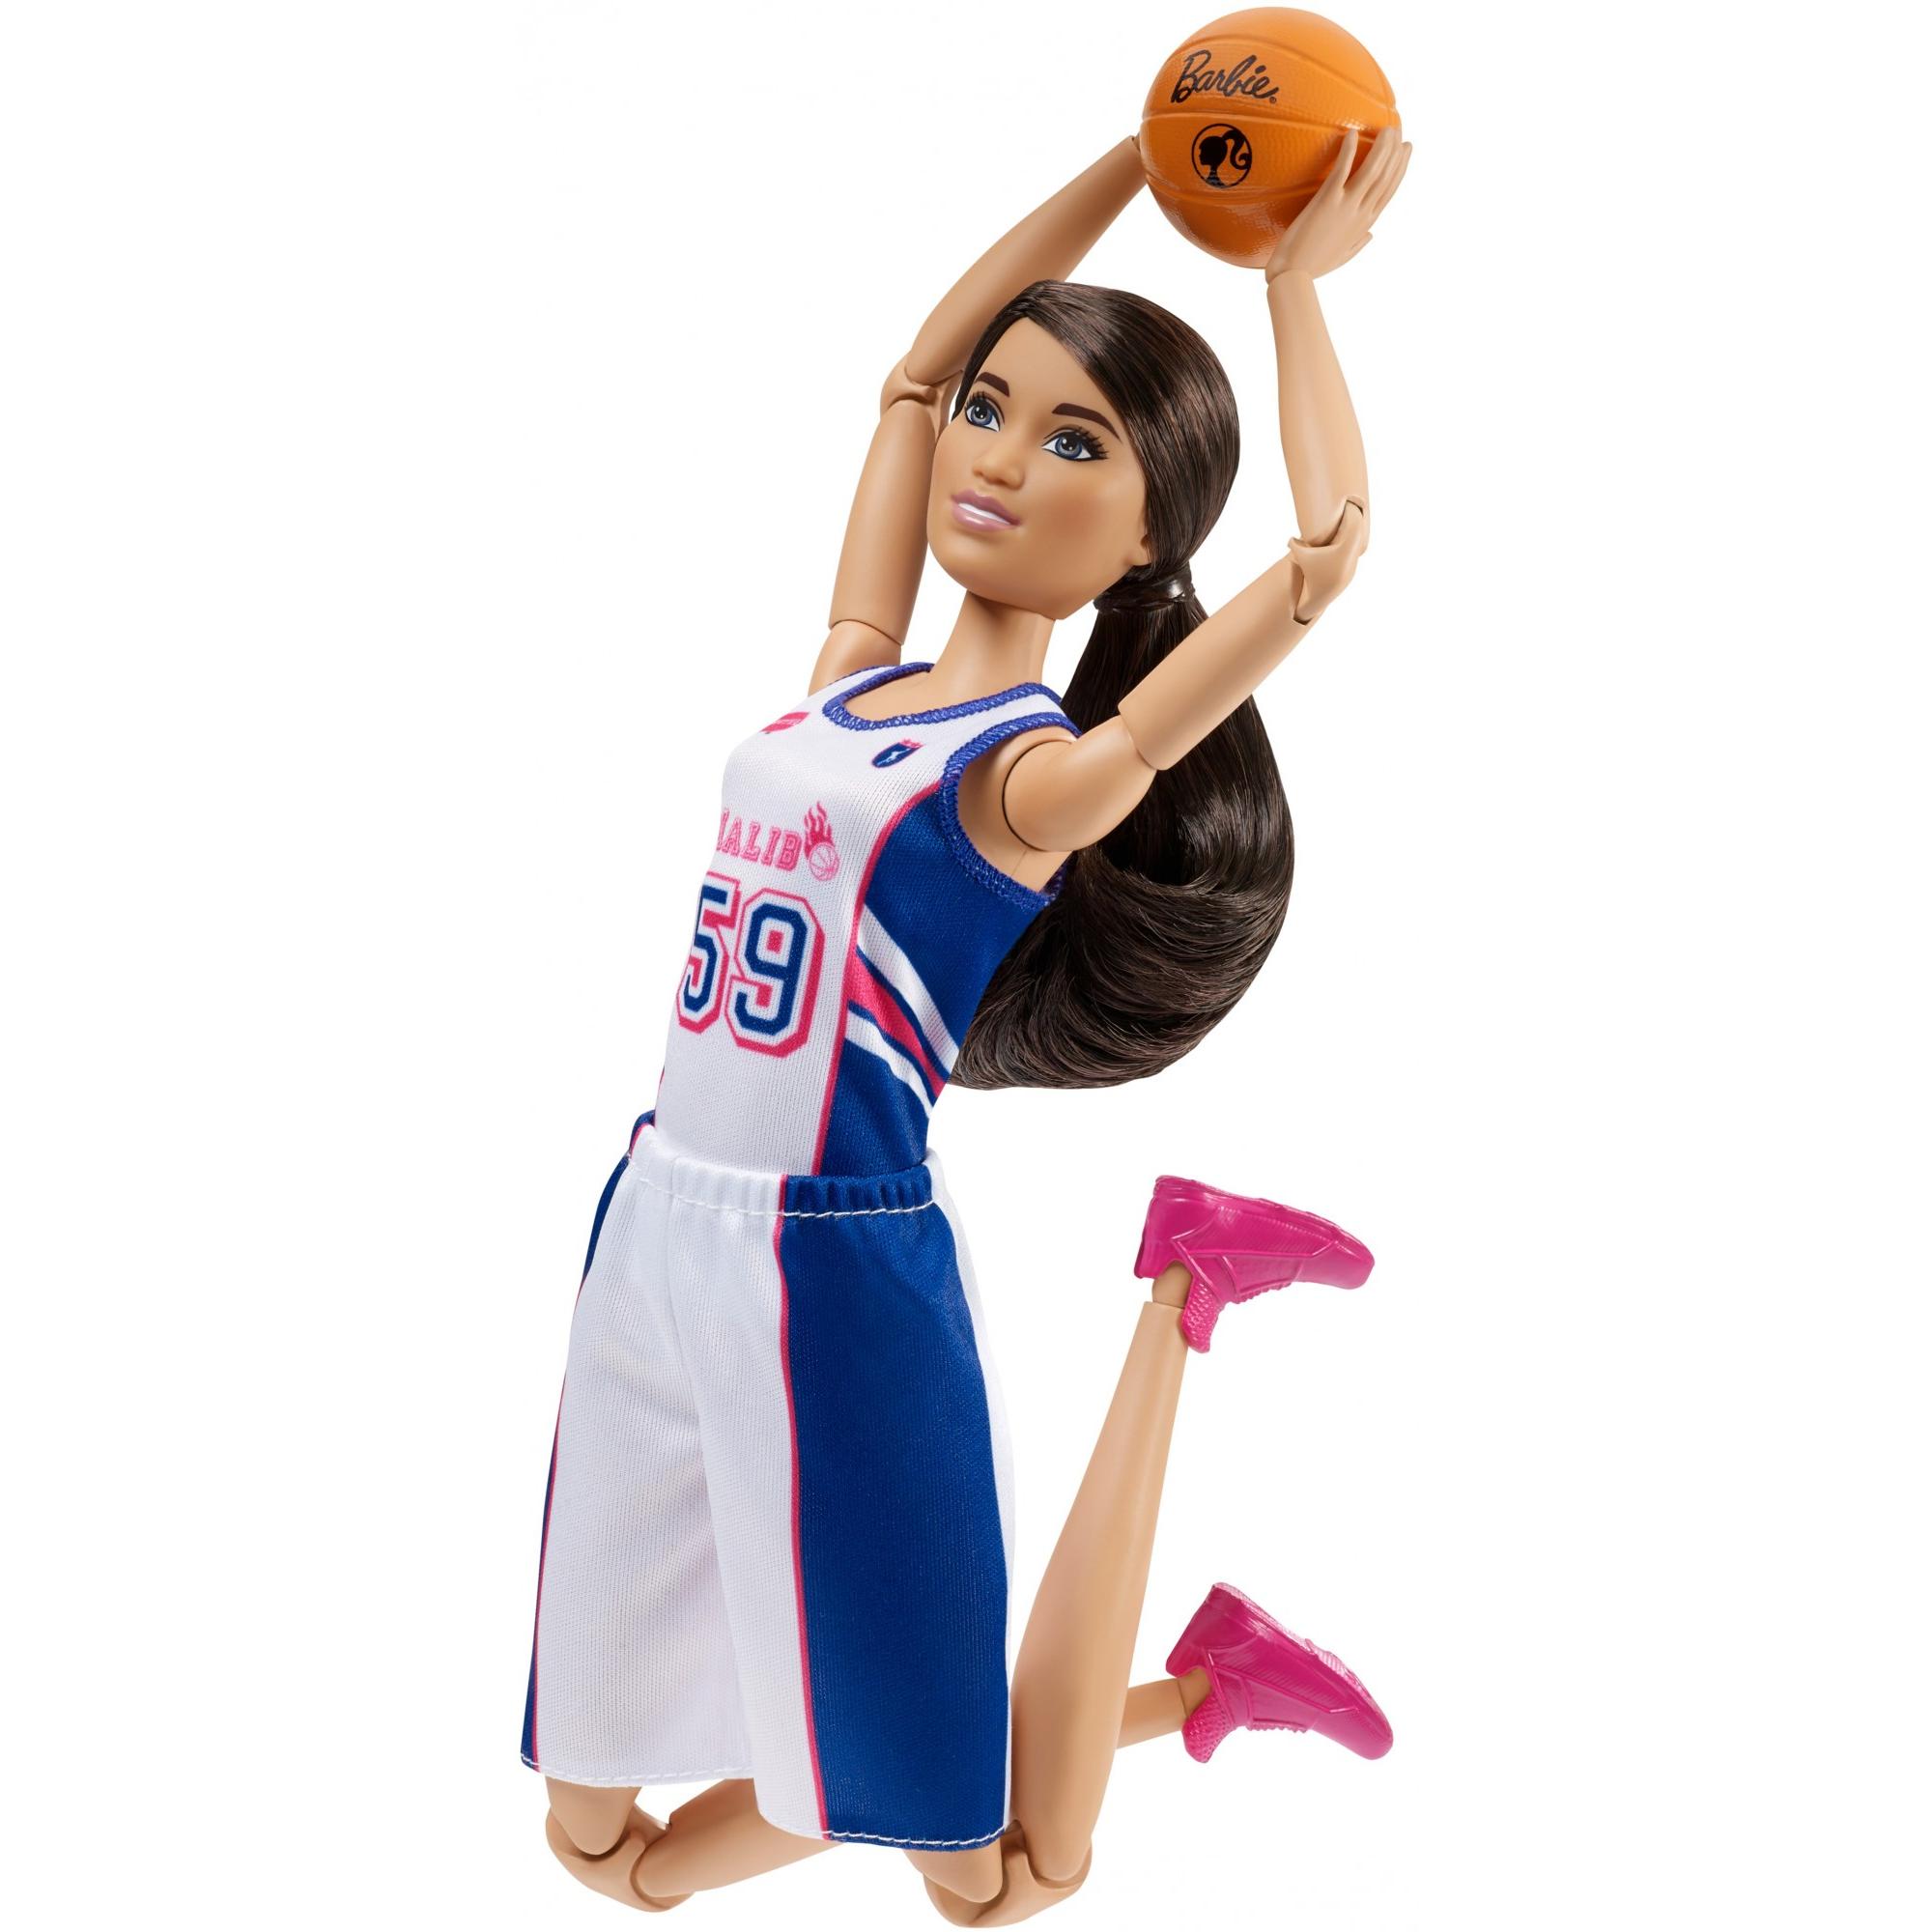 Barbie Made to Move Basketball Player Doll, Brunette - image 4 of 7